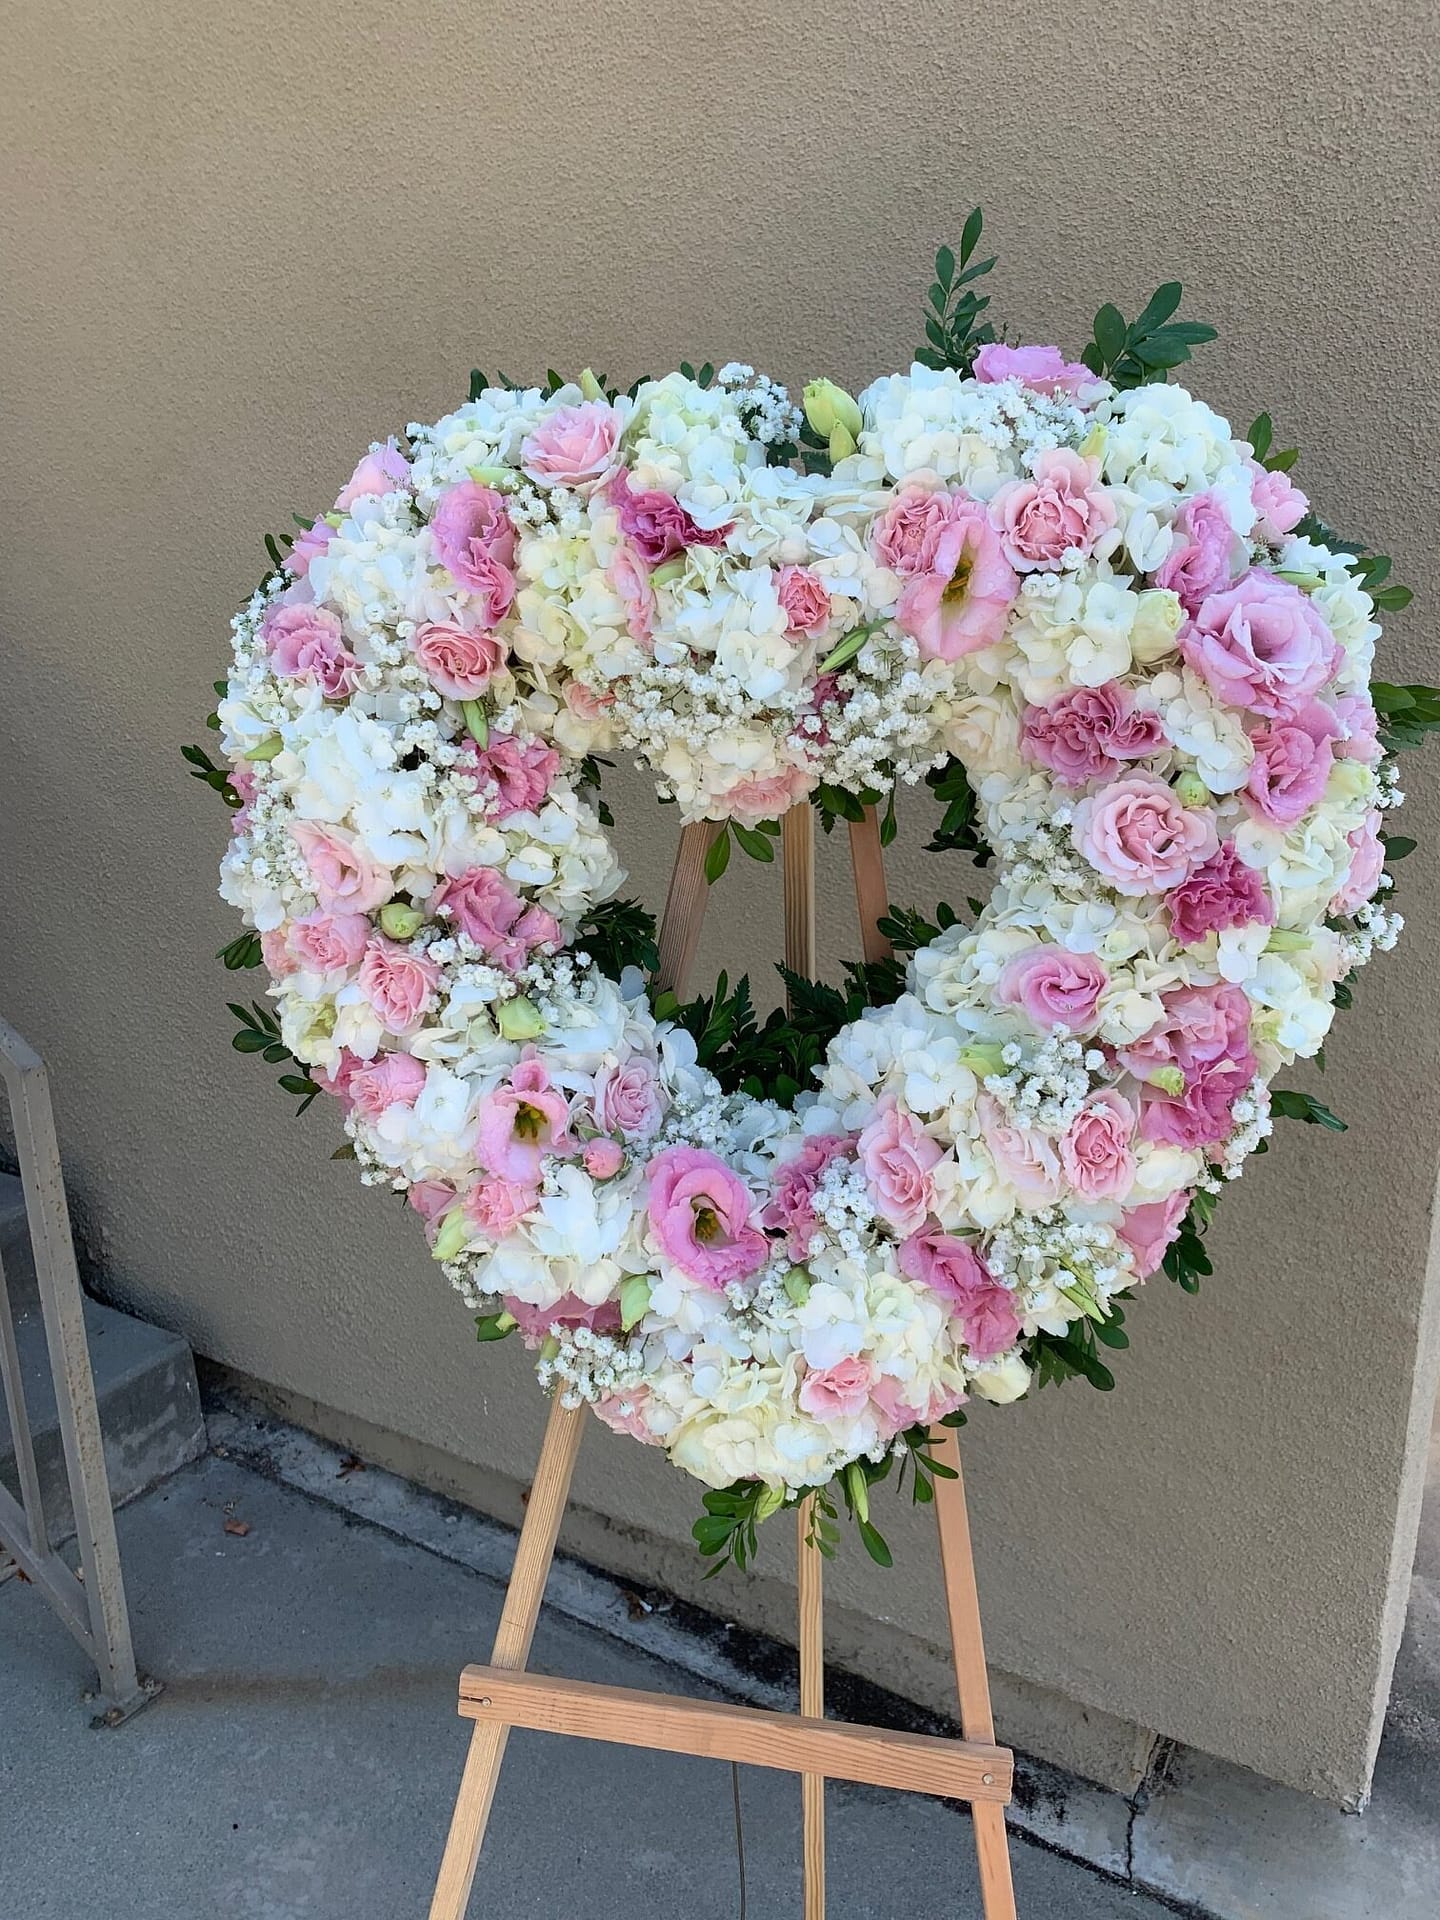 FUNERAL HEART WREATH - Forever Love 33